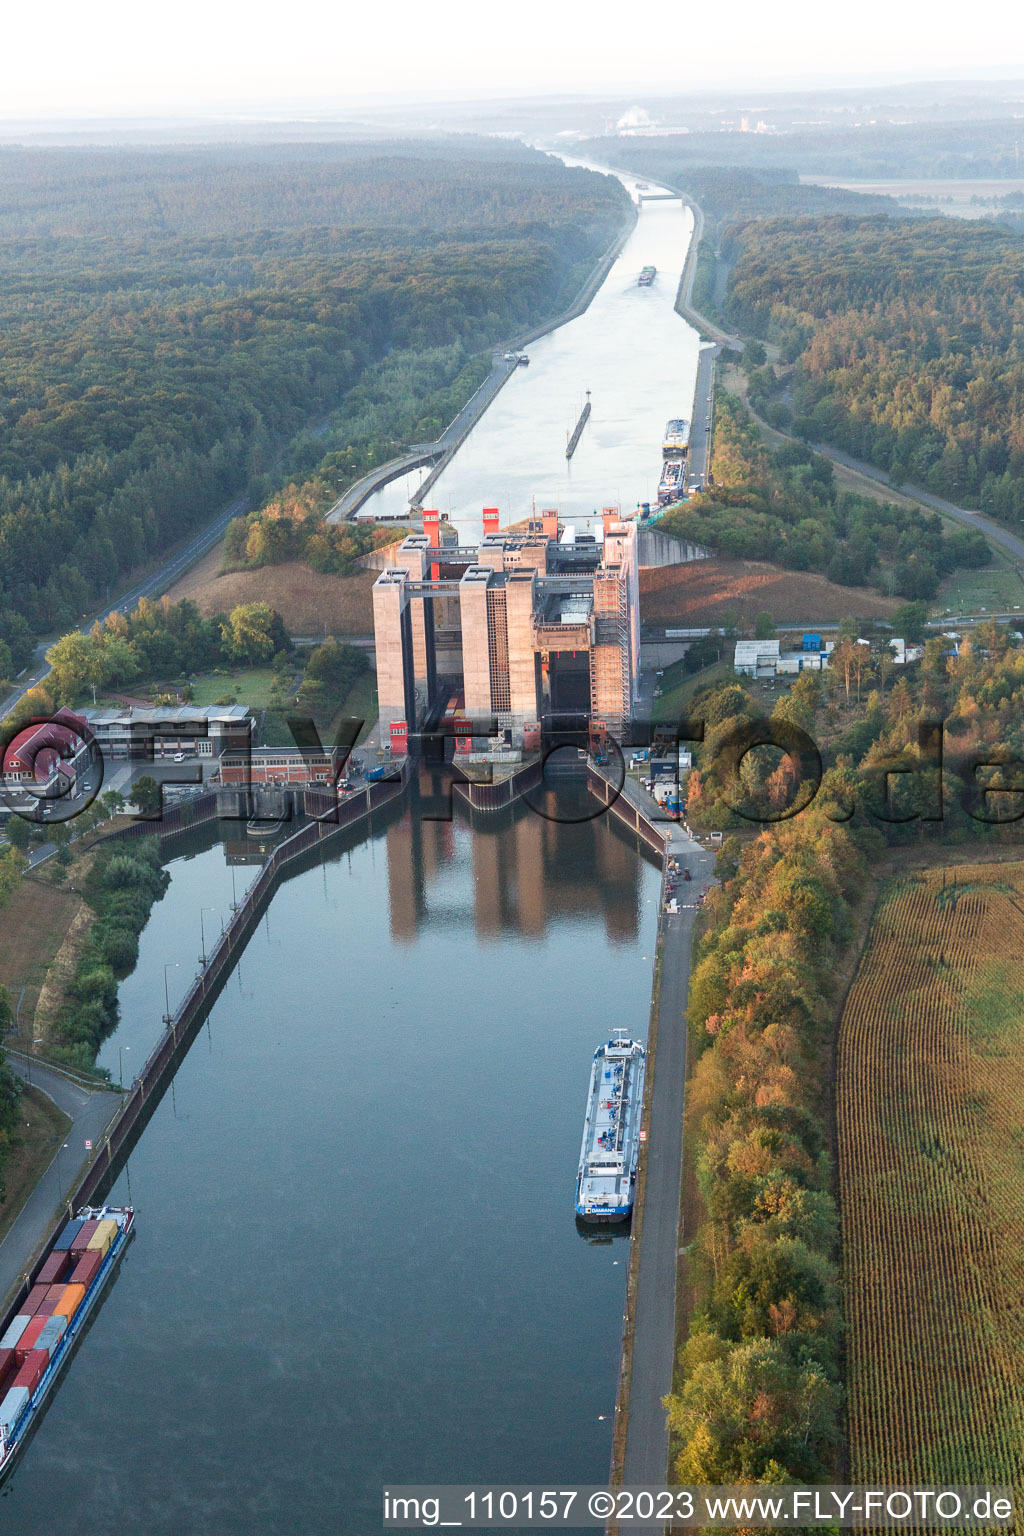 Oblique view of Boat lift and locks plants on the banks of the waterway of the Elbe side channel in Scharnebeck in the state Lower Saxony, Germany